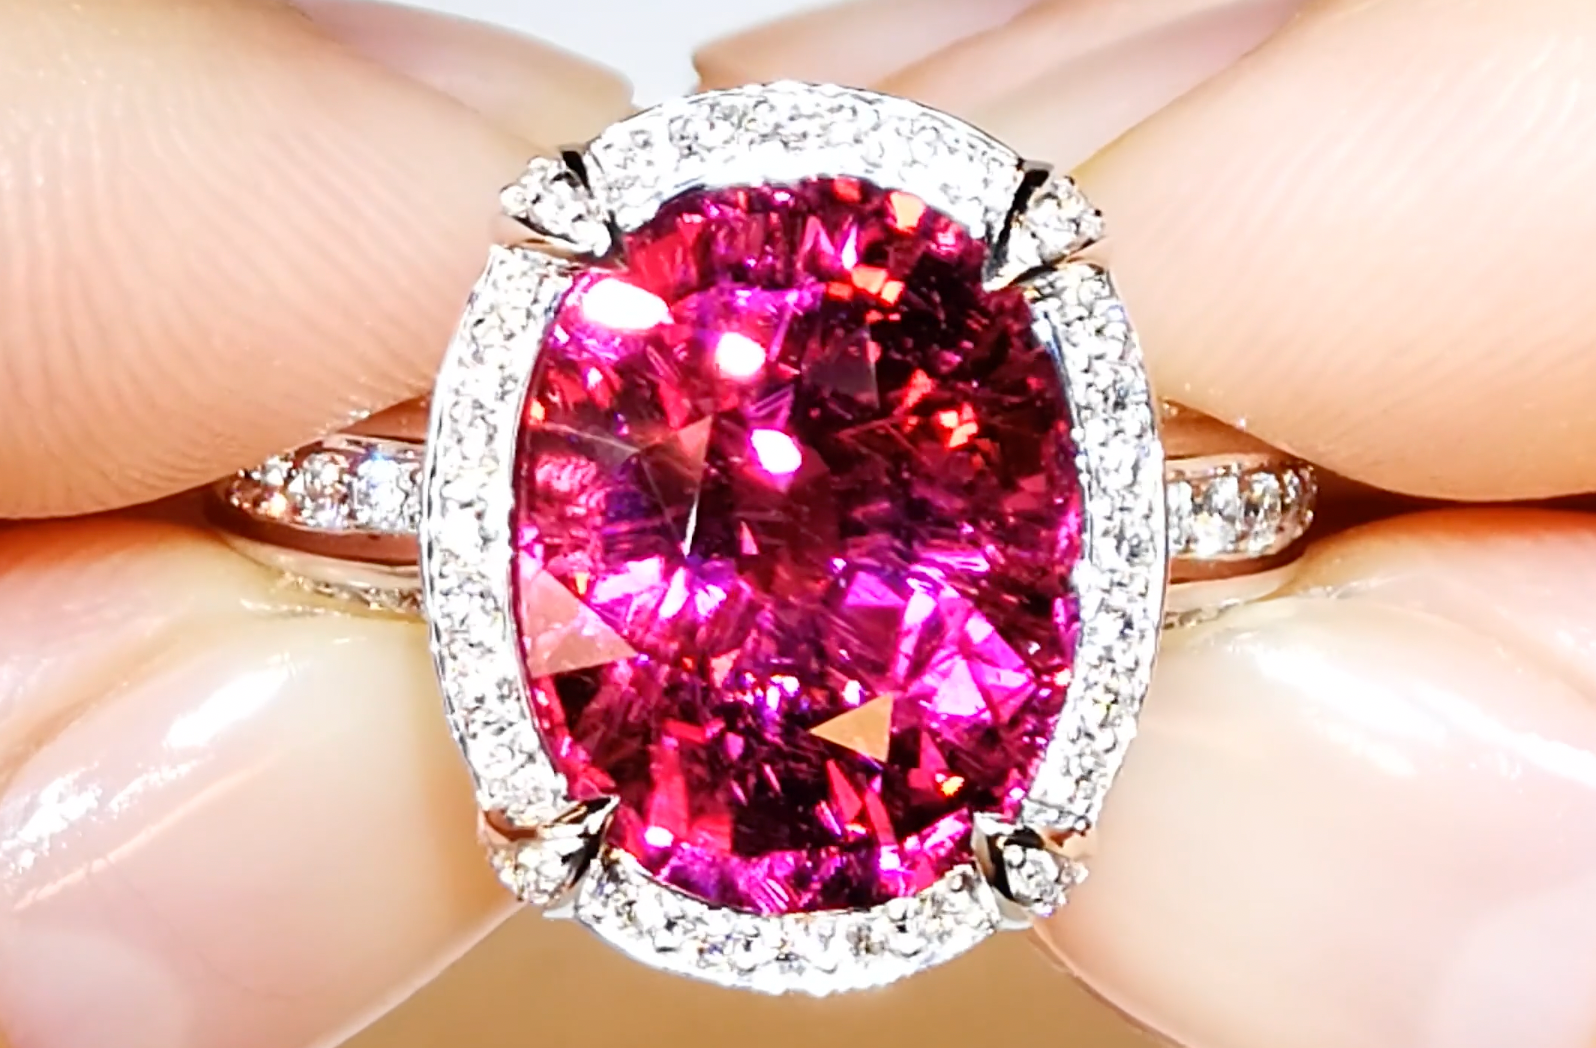 9.17ct Neon Rubellite Tourmaline Ring with D Flawless Diamonds set in 18K White Gold